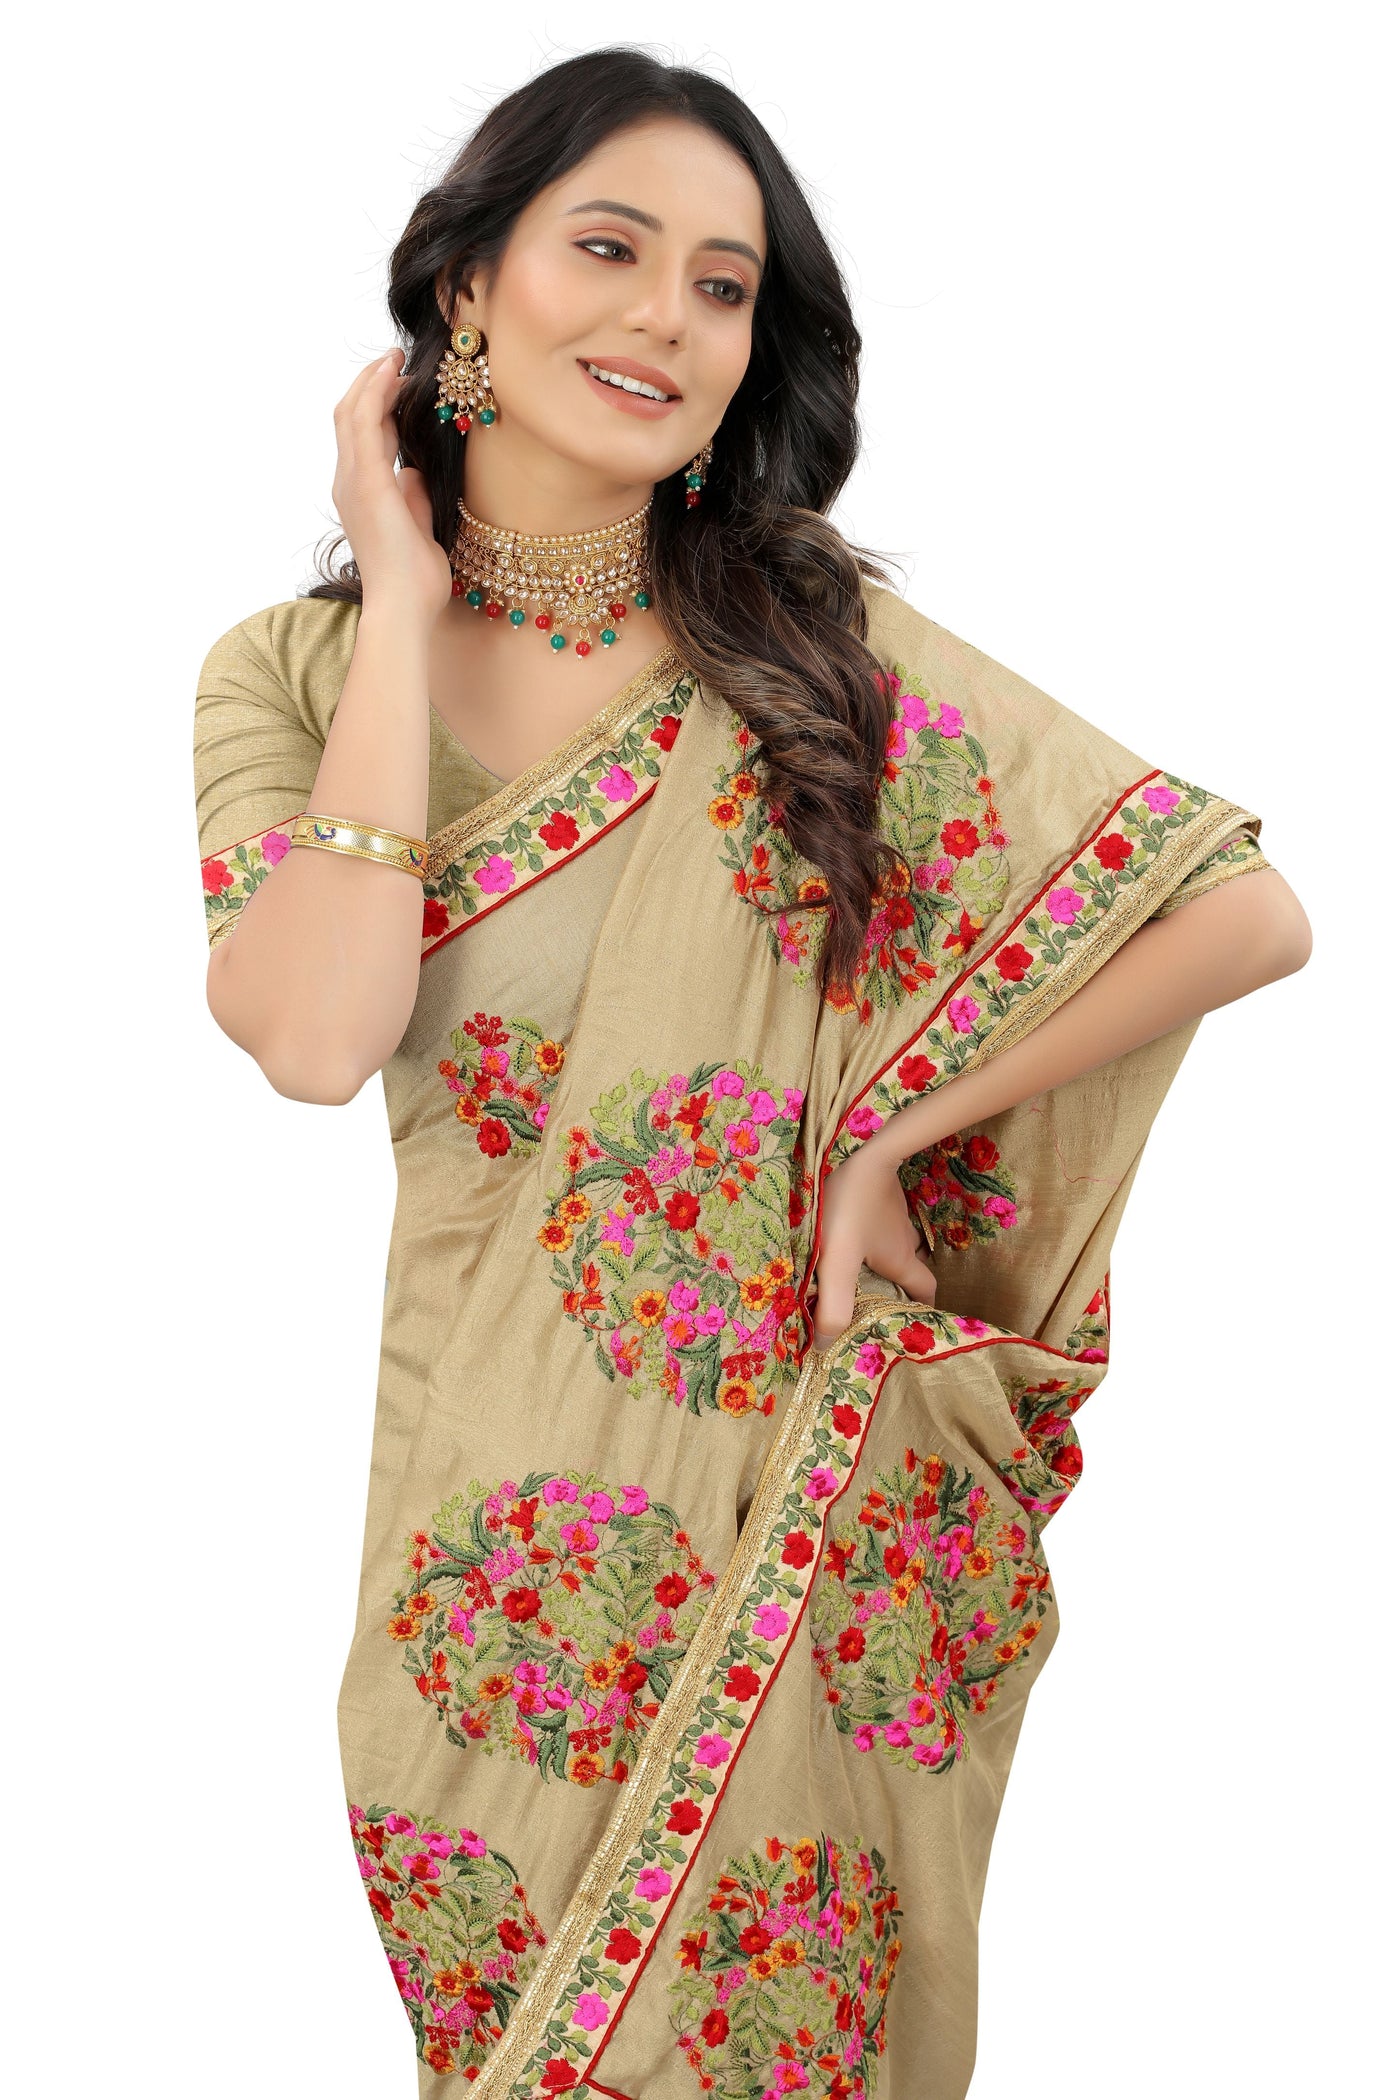 Beige Vichitra Silk Embroidered Saree With Blouse